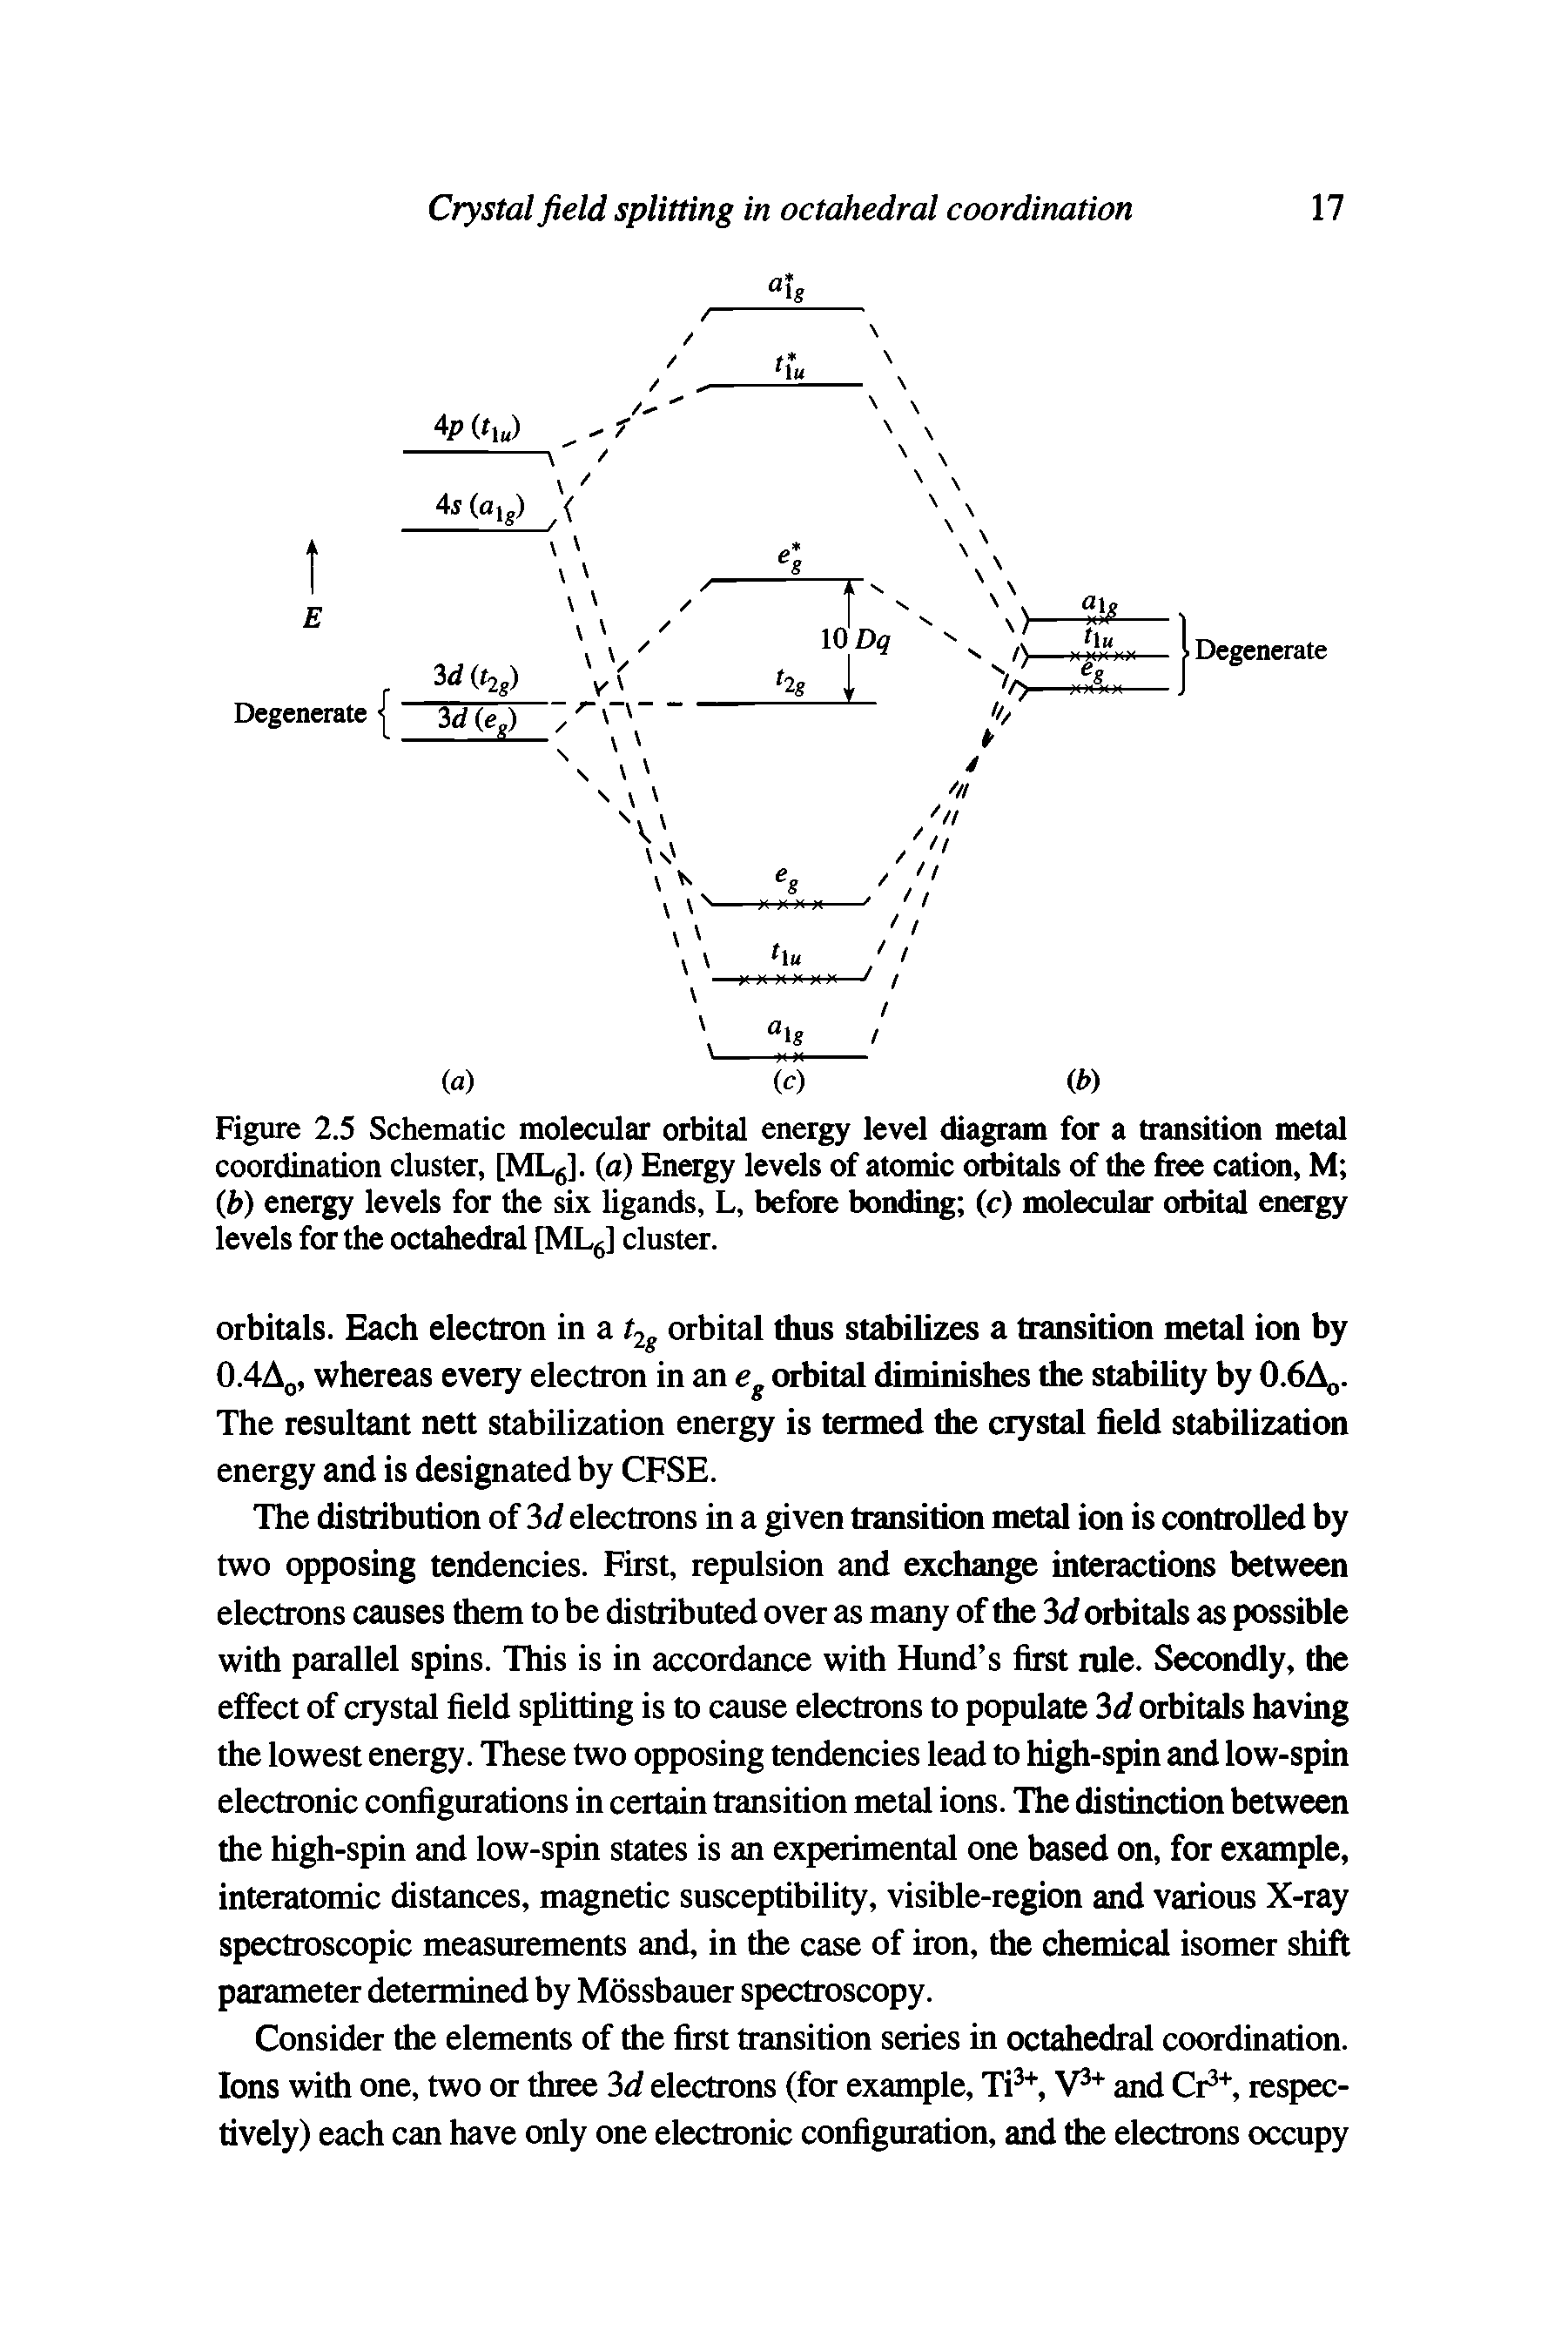 Figure 2.5 Schematic molecular orbital energy level diagram for a transition metal coordination cluster, [ML6]. (a) Energy levels of atomic orbitals of the free cation, M (b) energy levels for the six ligands, L, before bonding (c) molecular orbital energy levels for the octahedral [ML6] cluster.